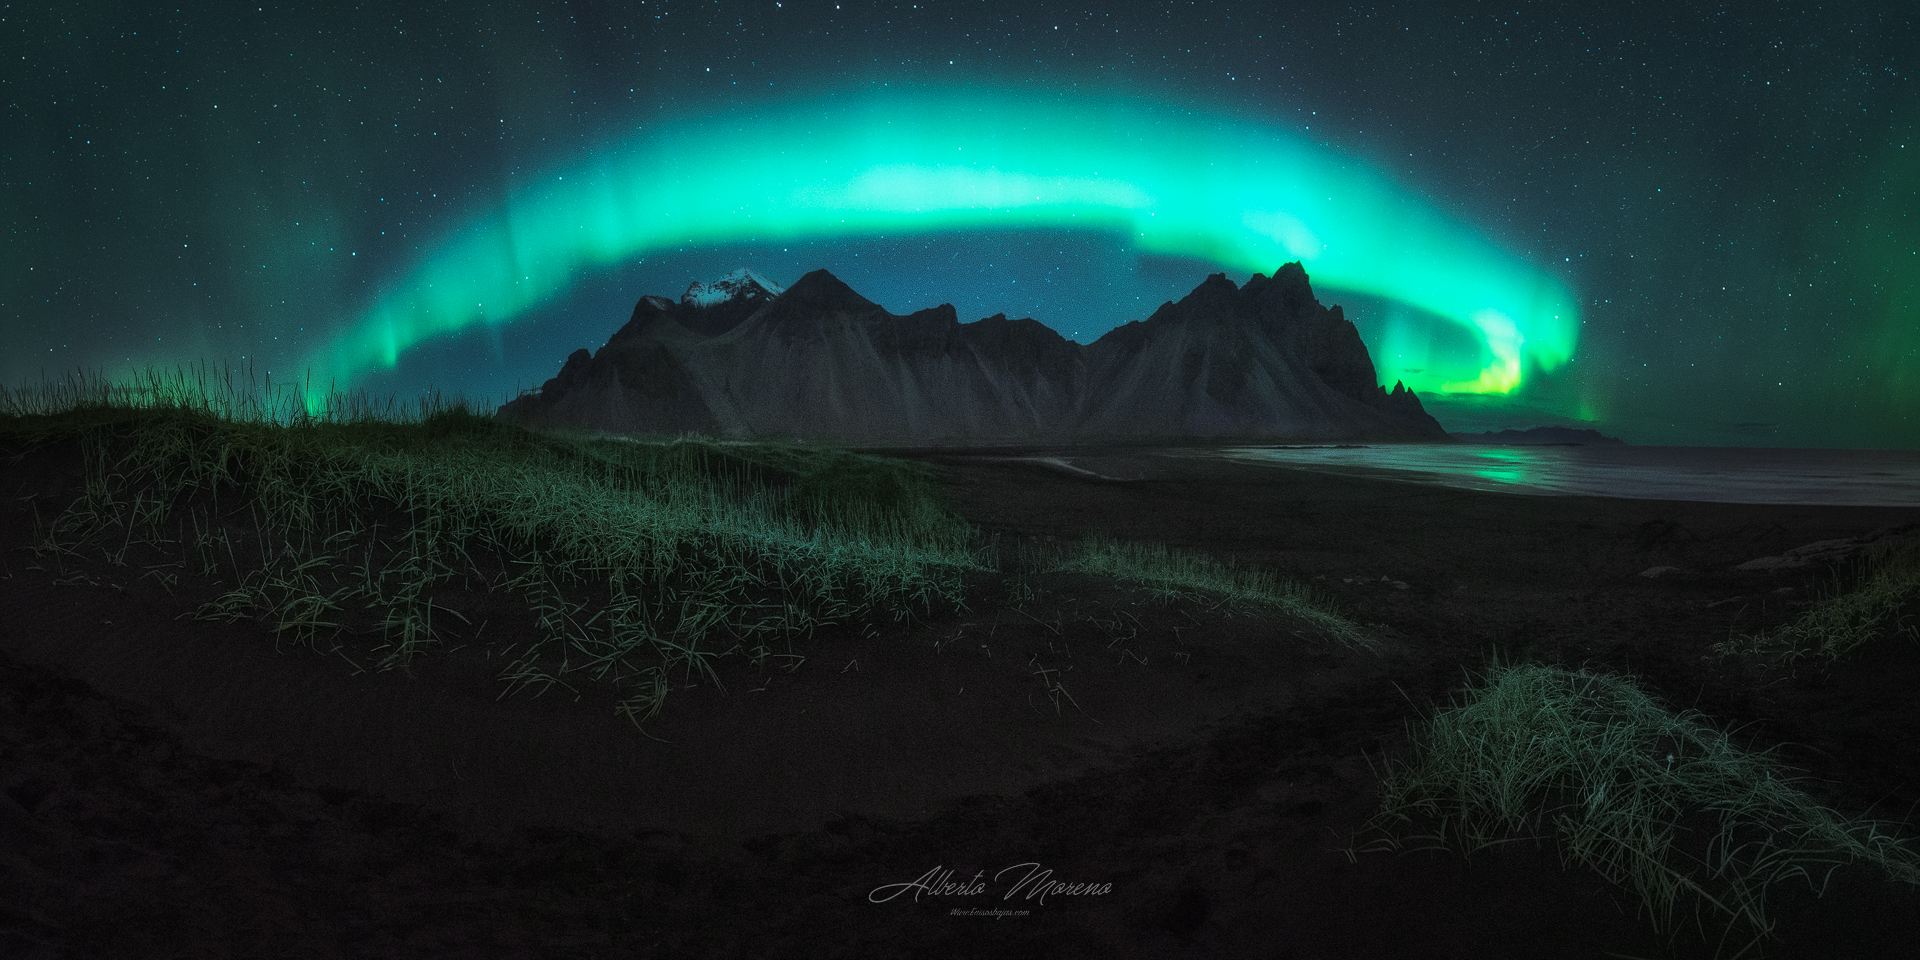 Iceland, boreal, Northern lights, Stokness, Green, Night photography, Night, nightscape, rocks, mountains, Beach